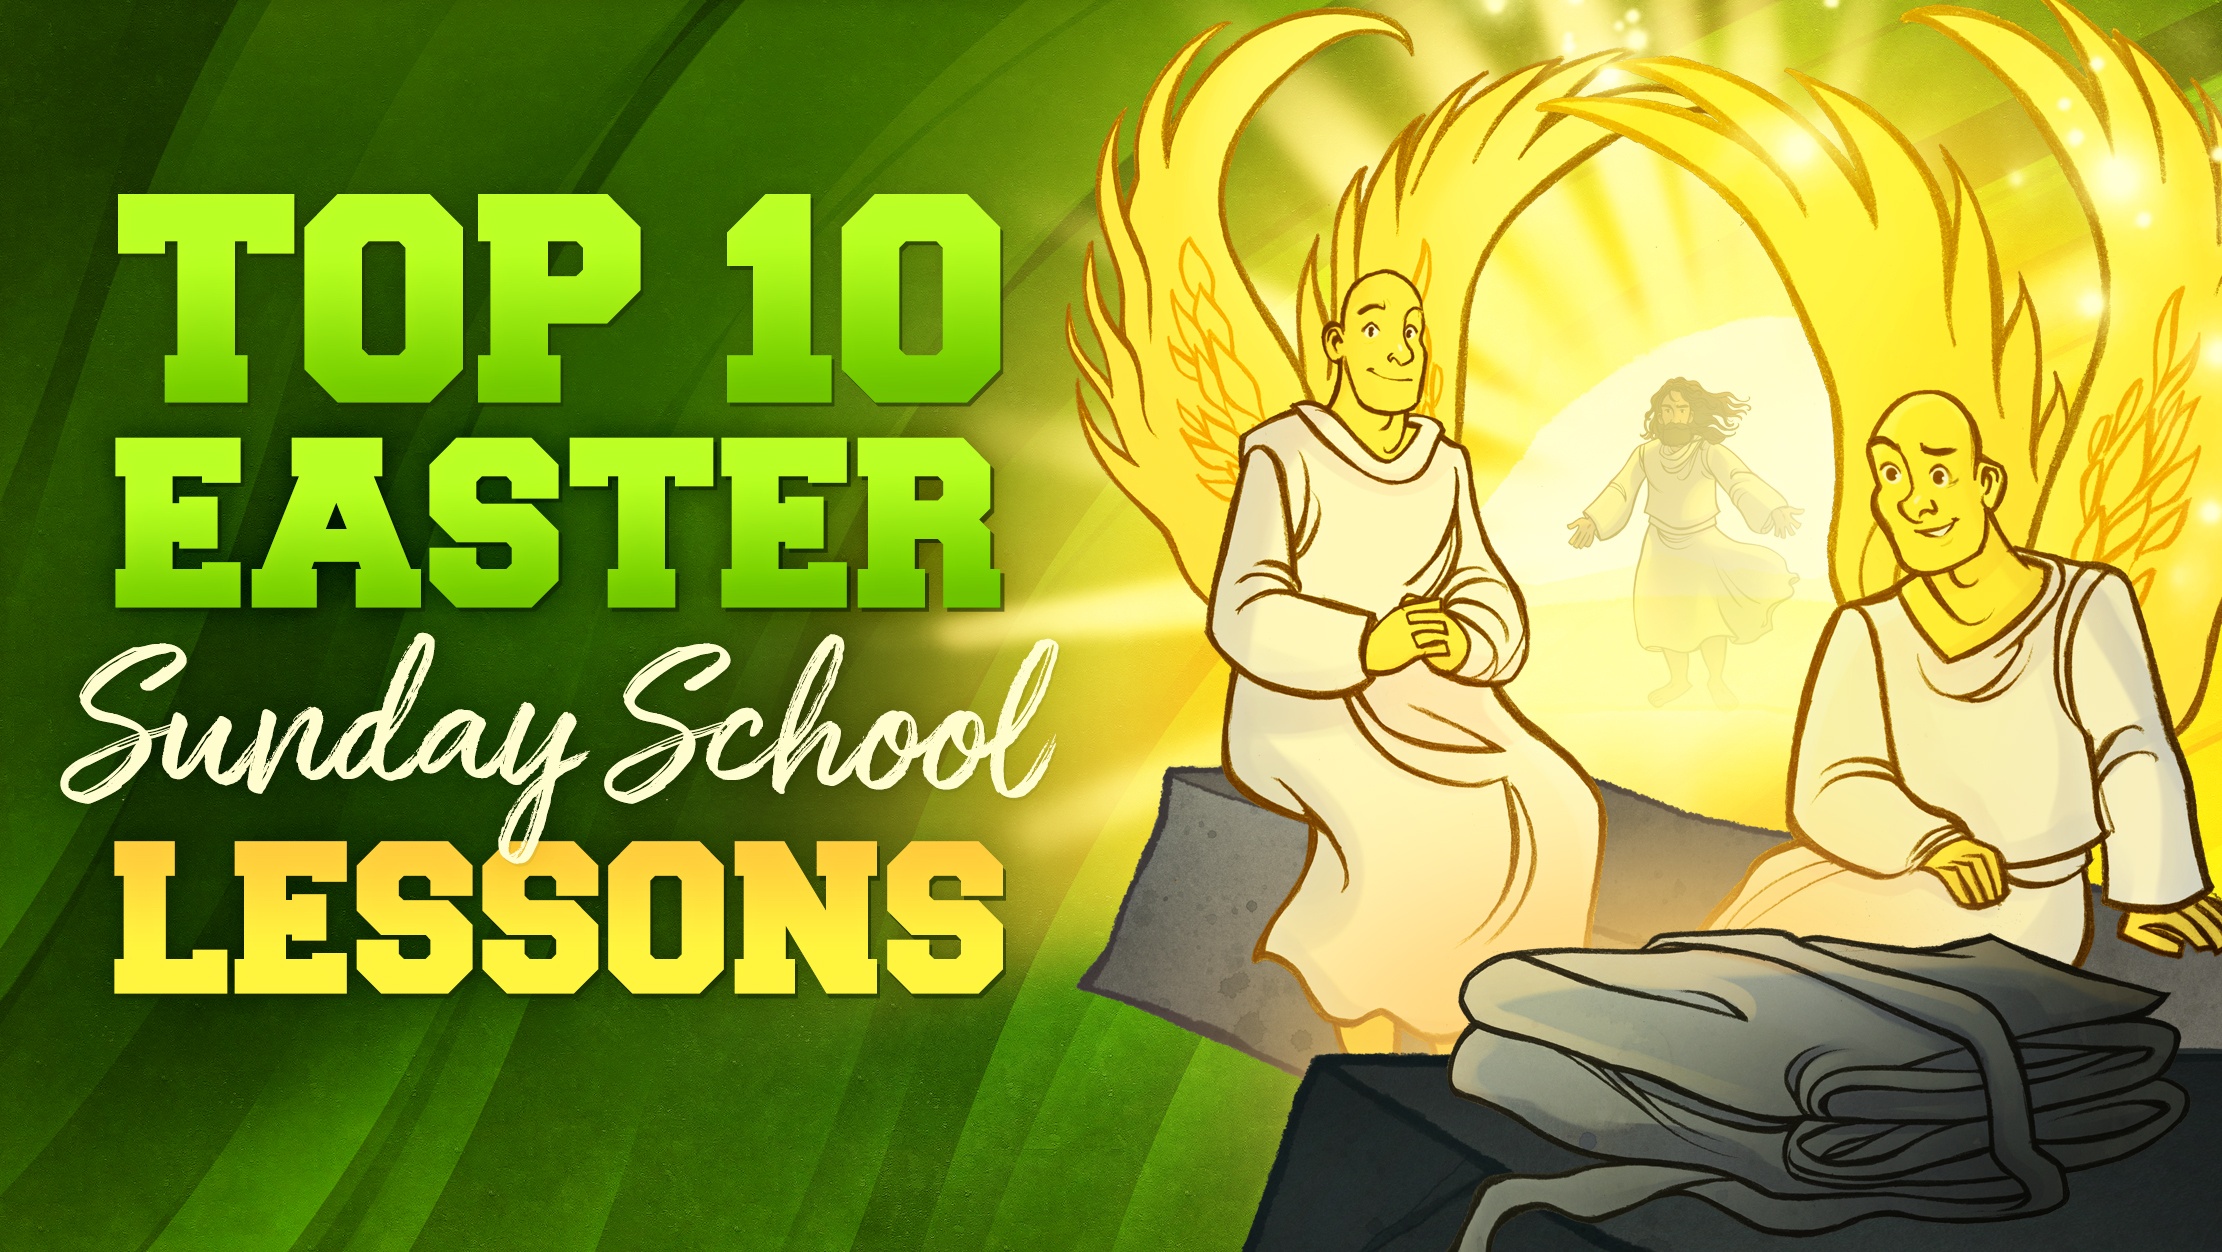 The Top 10 Easter Sunday School Lessons for Sunday School